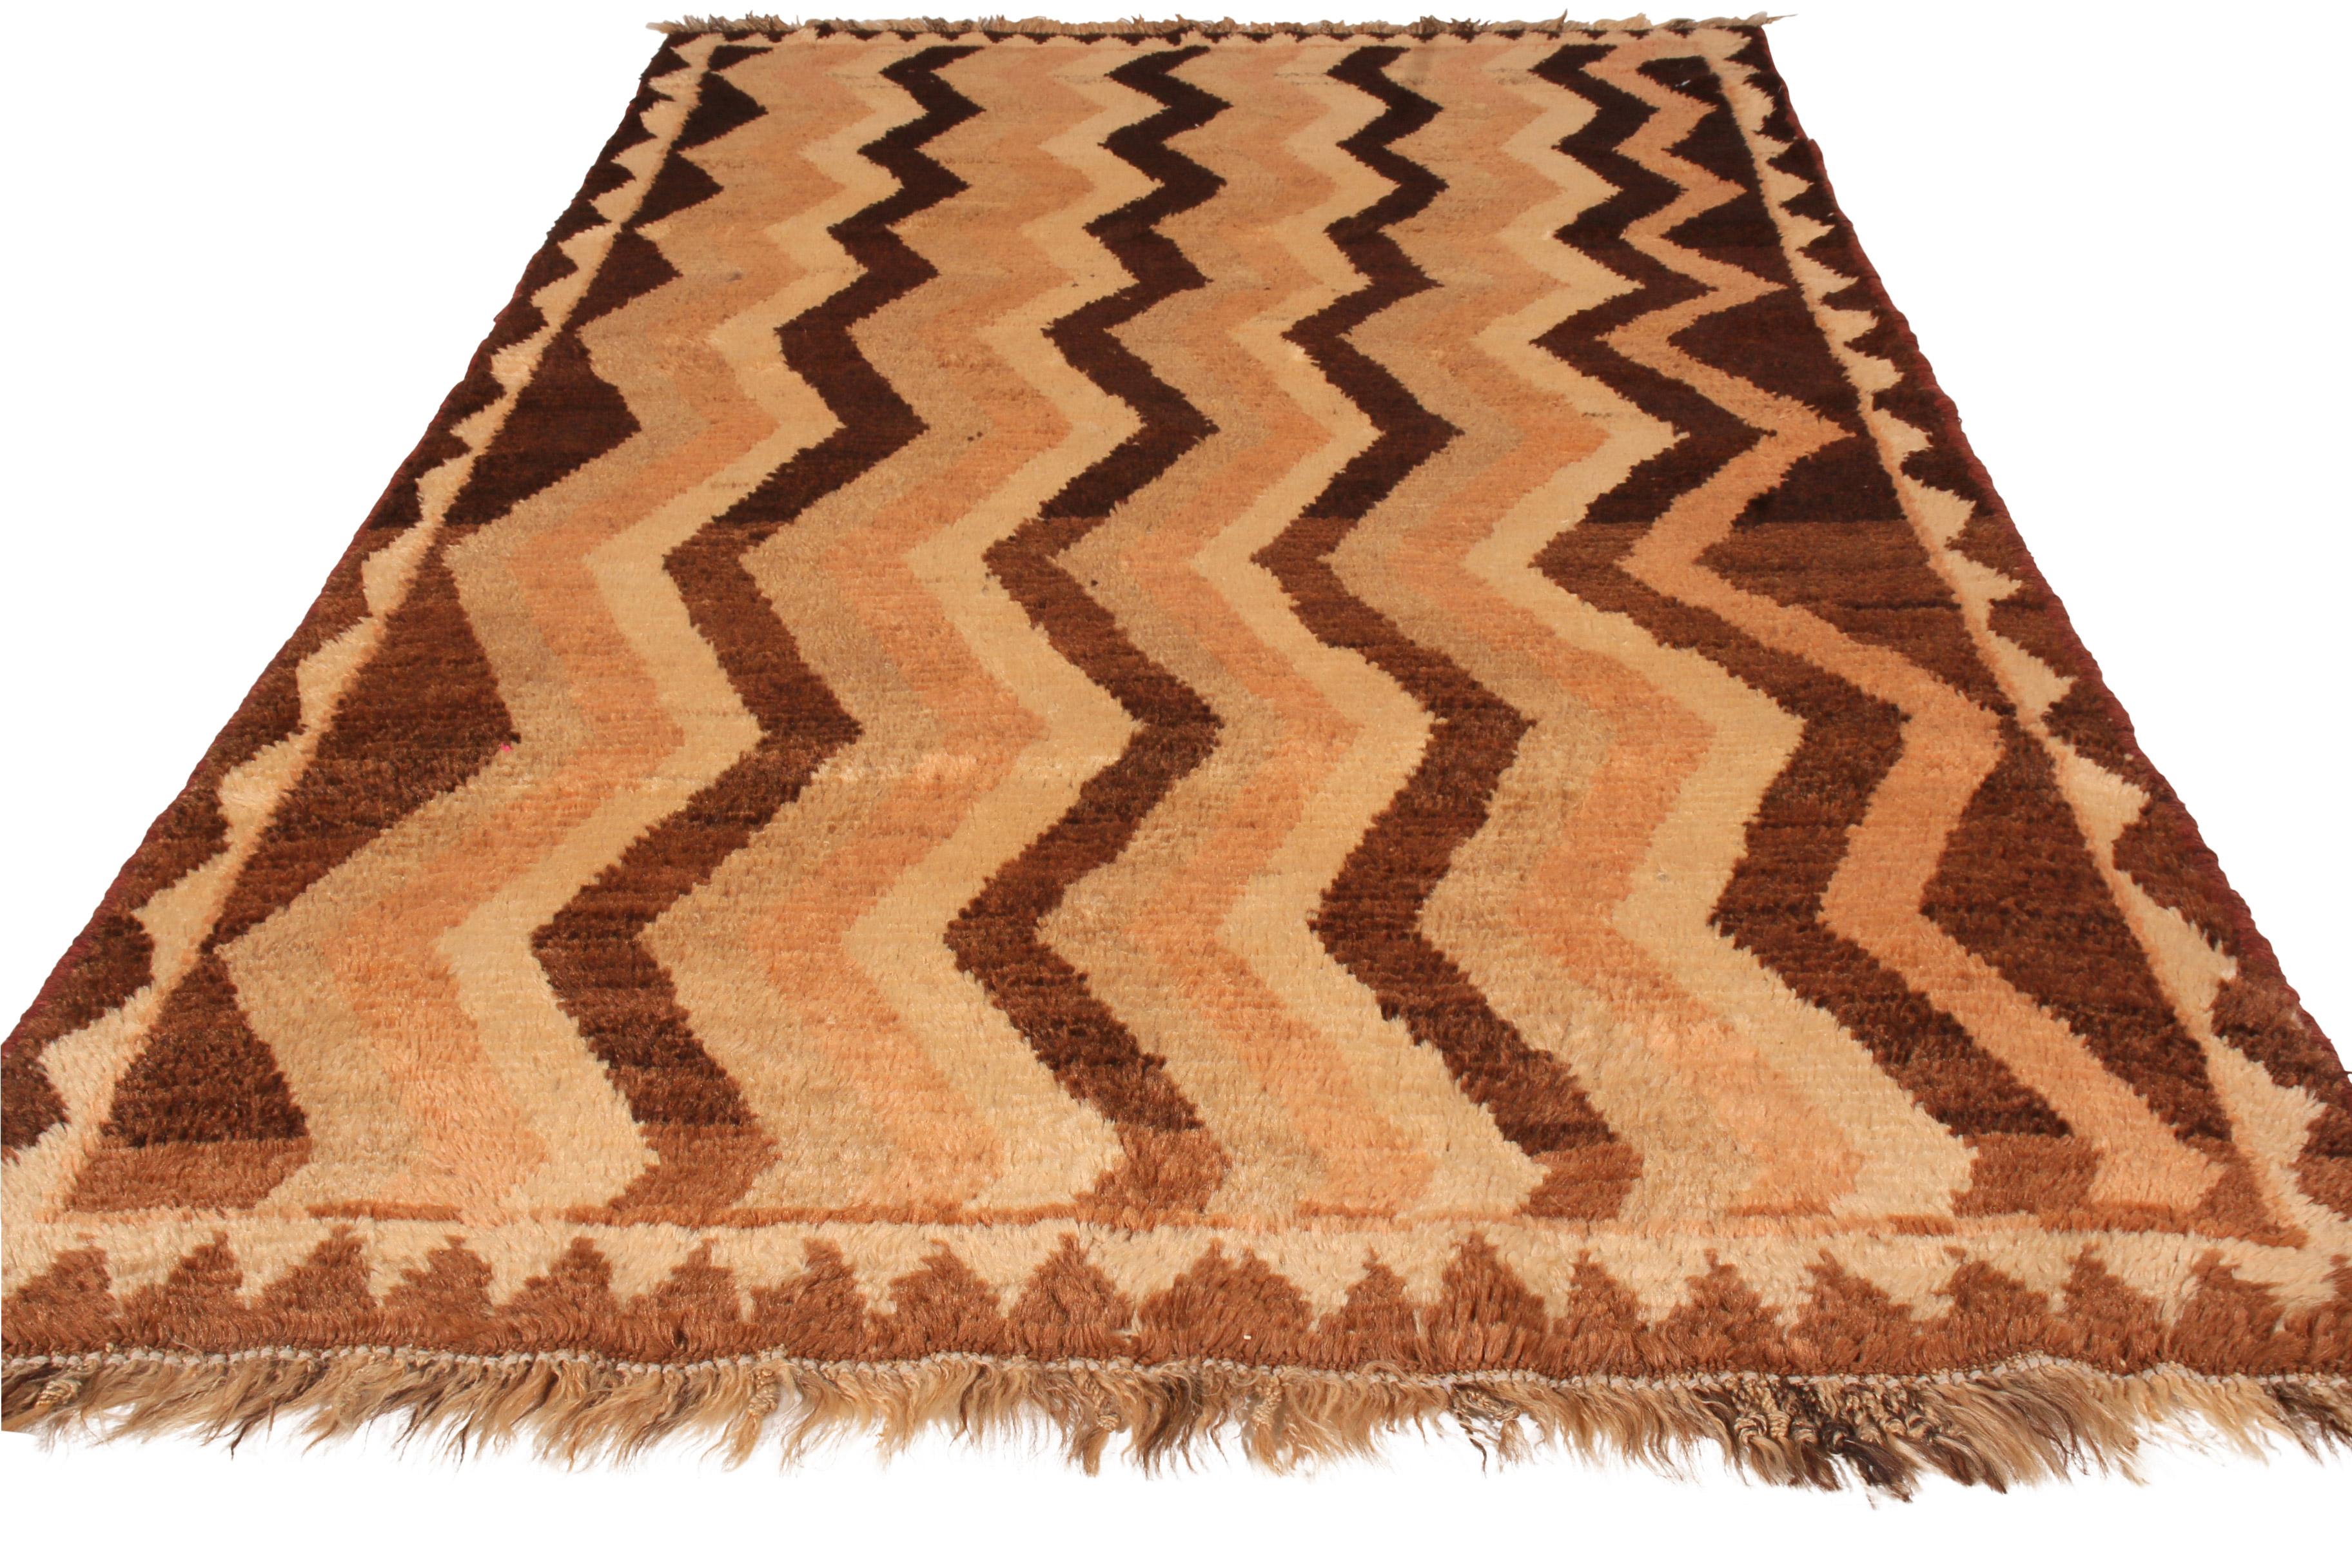 Made with hand knotted wool and originating between 1910-1920, this antique Gabbeh Persian rug recaptures the Classic chevron pattern its lineage is known for in an uncommonly reserved colorway pallet, enjoying warm and rich juxtaposition of beige